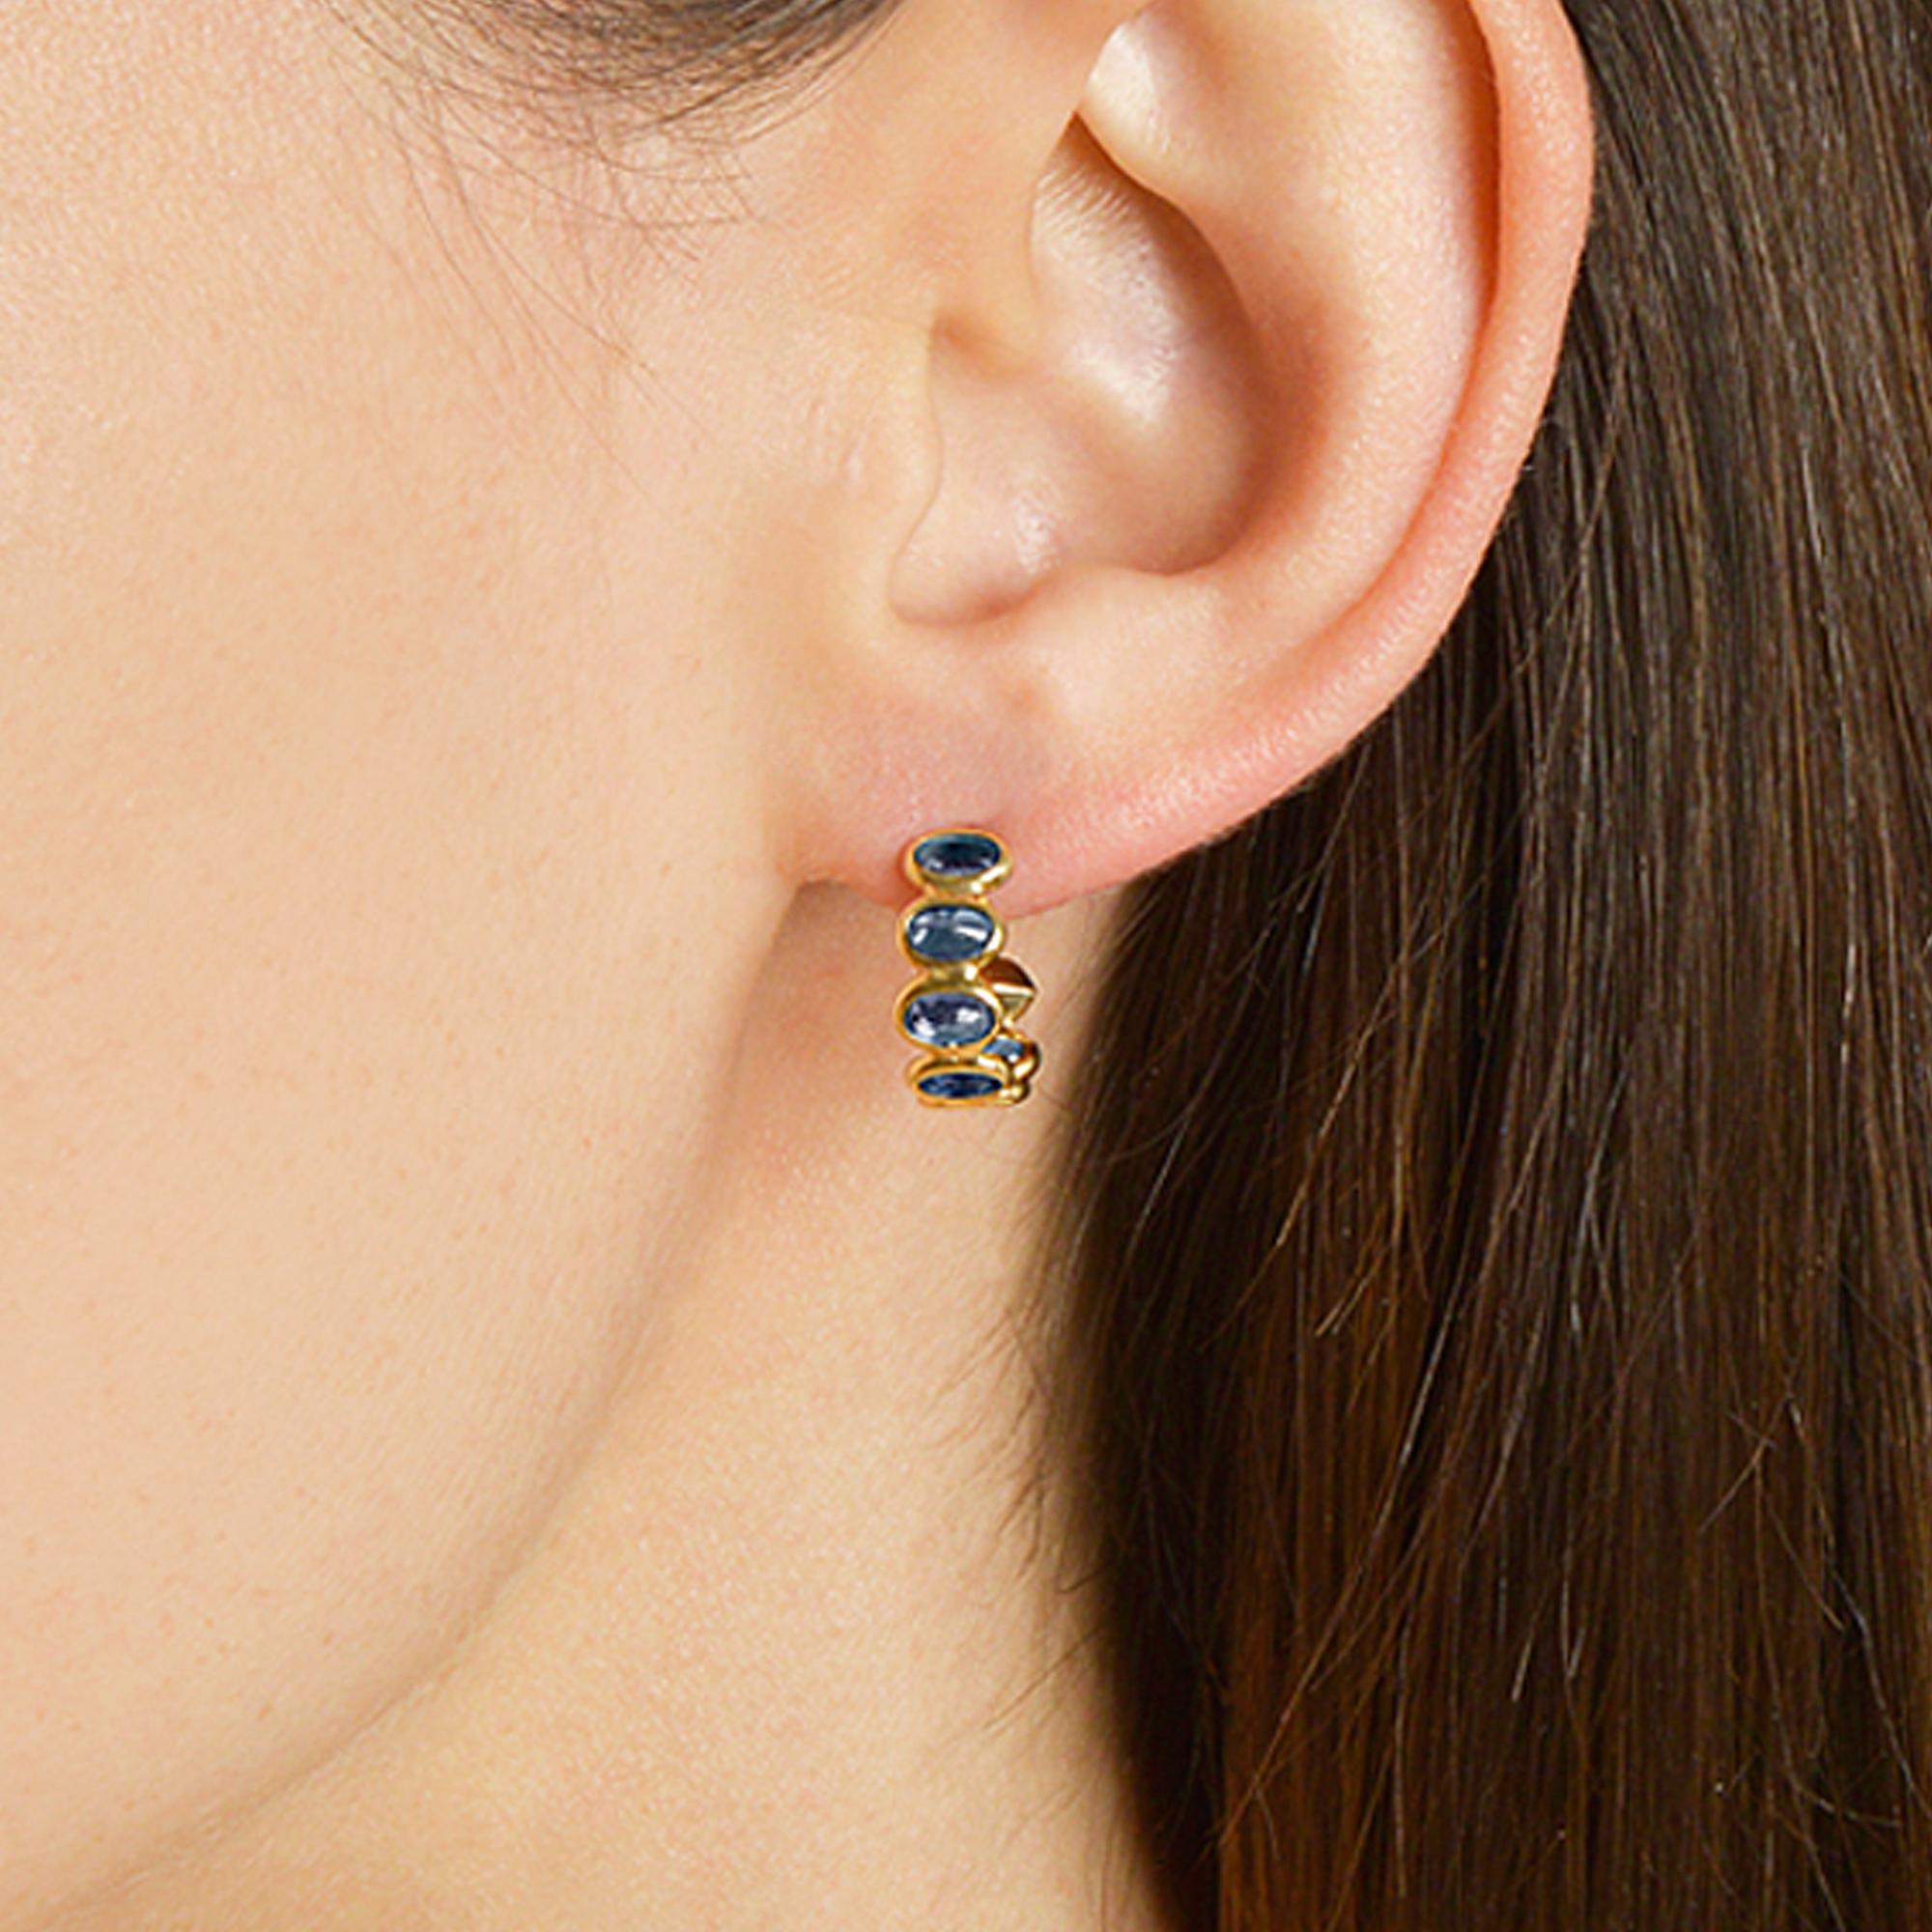 Contemporary Paolo Costagli 18 Karat Yellow Gold Blue Sapphire 3.70 Carat Hoop Earring Petite For Sale